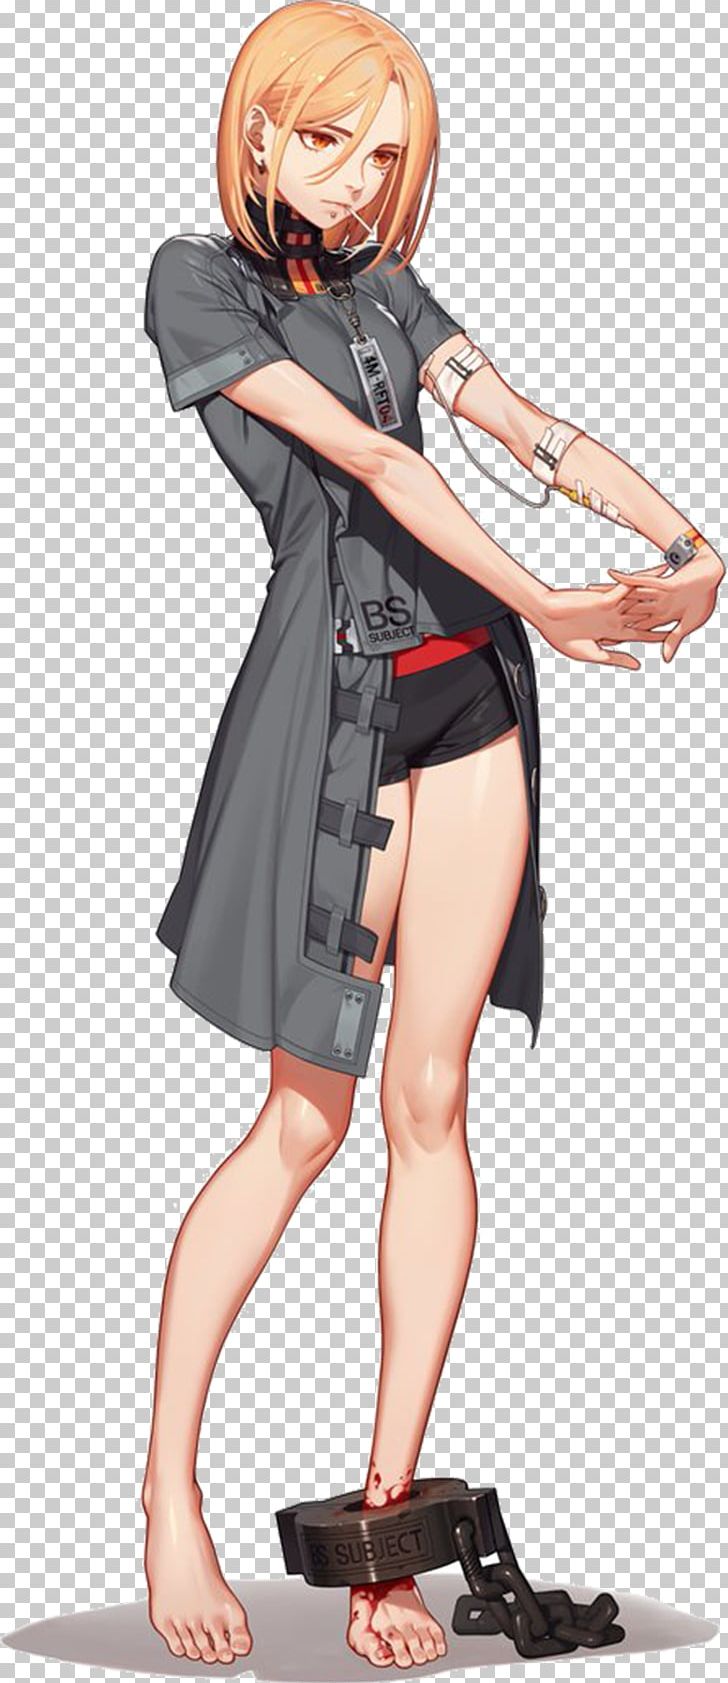 Black Survival Character Concept PNG, Clipart, Anime, Archbears, Art, Attribute, Battle Royale Free PNG Download